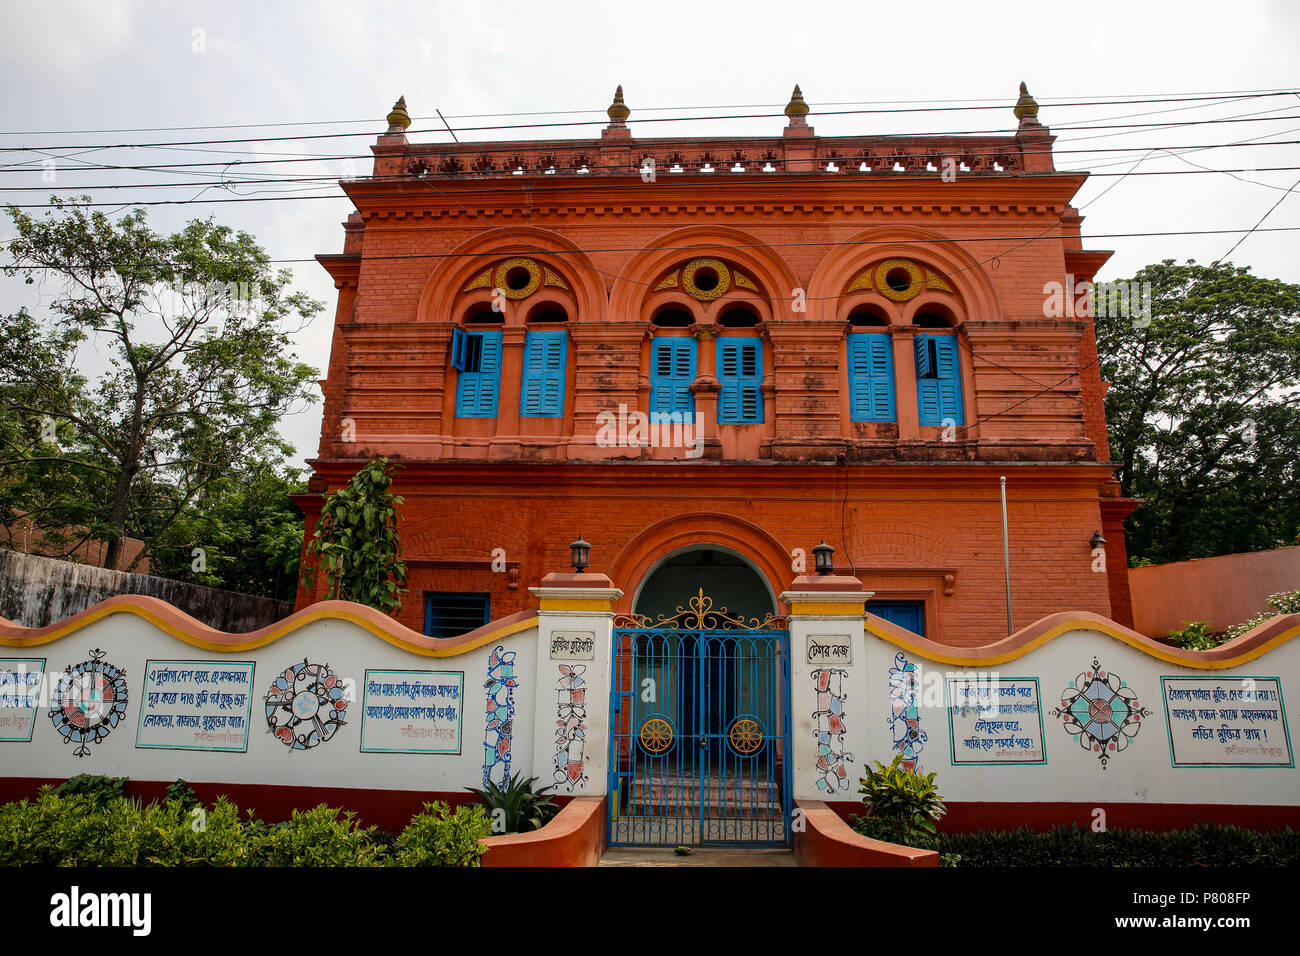 Tagore Lodge, the ancestral house of Nobel laureate poet Rabindranath Tagore in Kushtia town has been converted into “Tagore Museum”. Stock Photo